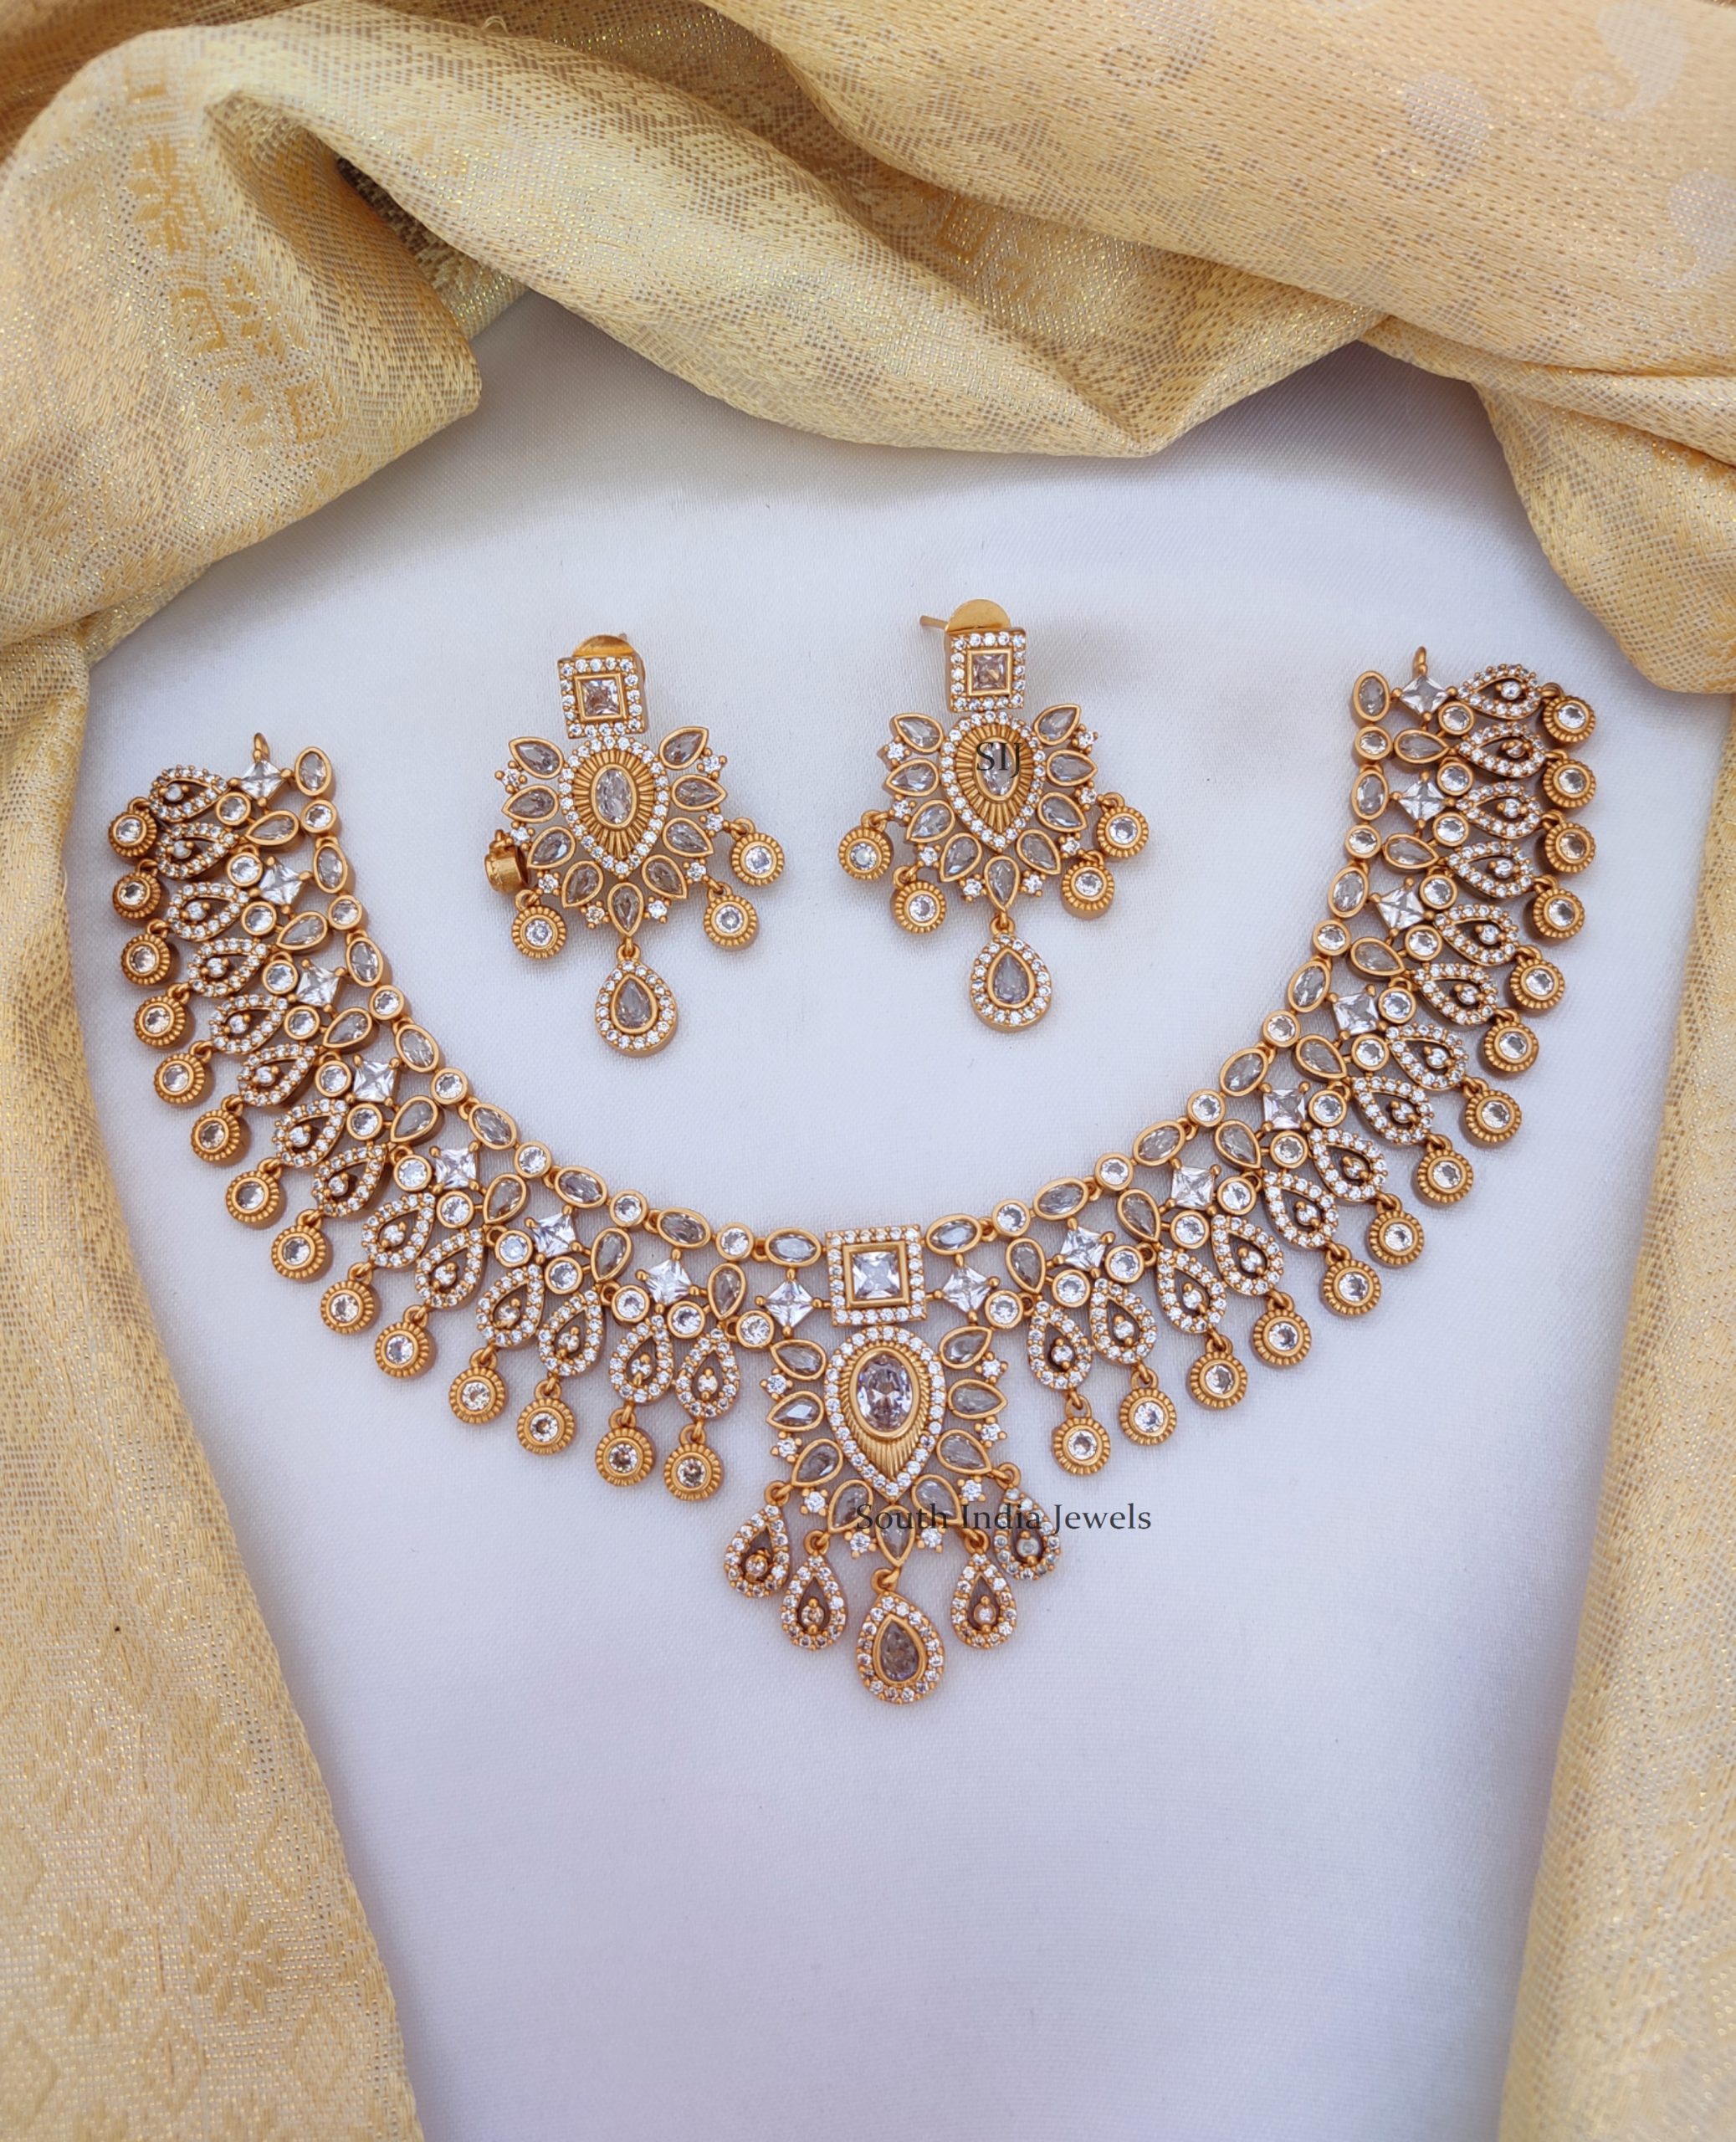 AD Design Artificial Necklace | Teardrop Necklace- South India Jewels